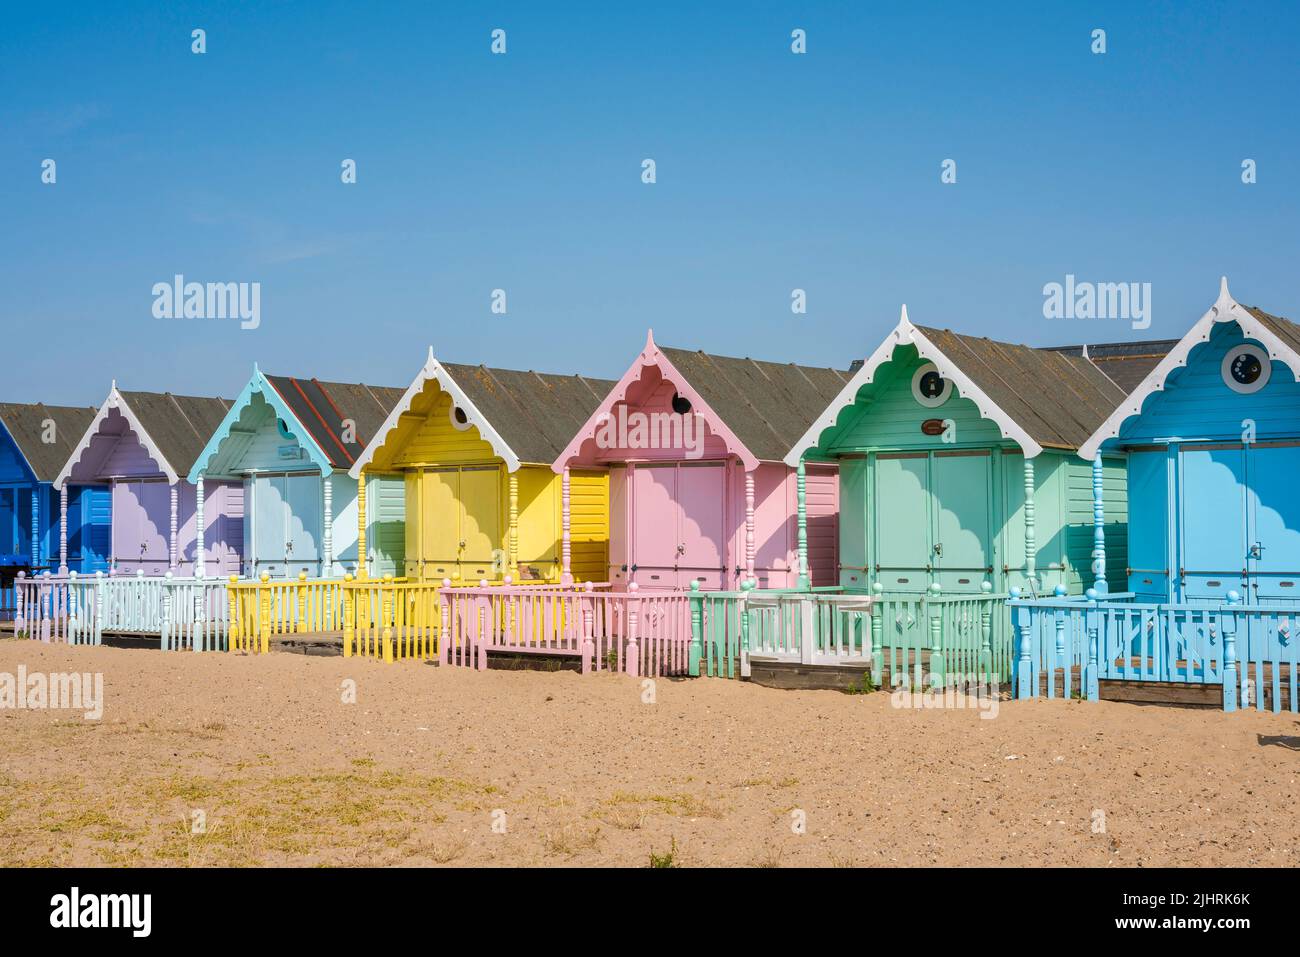 Beach huts UK, view on a summer day of a row of colourful traditional beach huts sited on the beach in West Mersea, Essex, England, UK Stock Photo